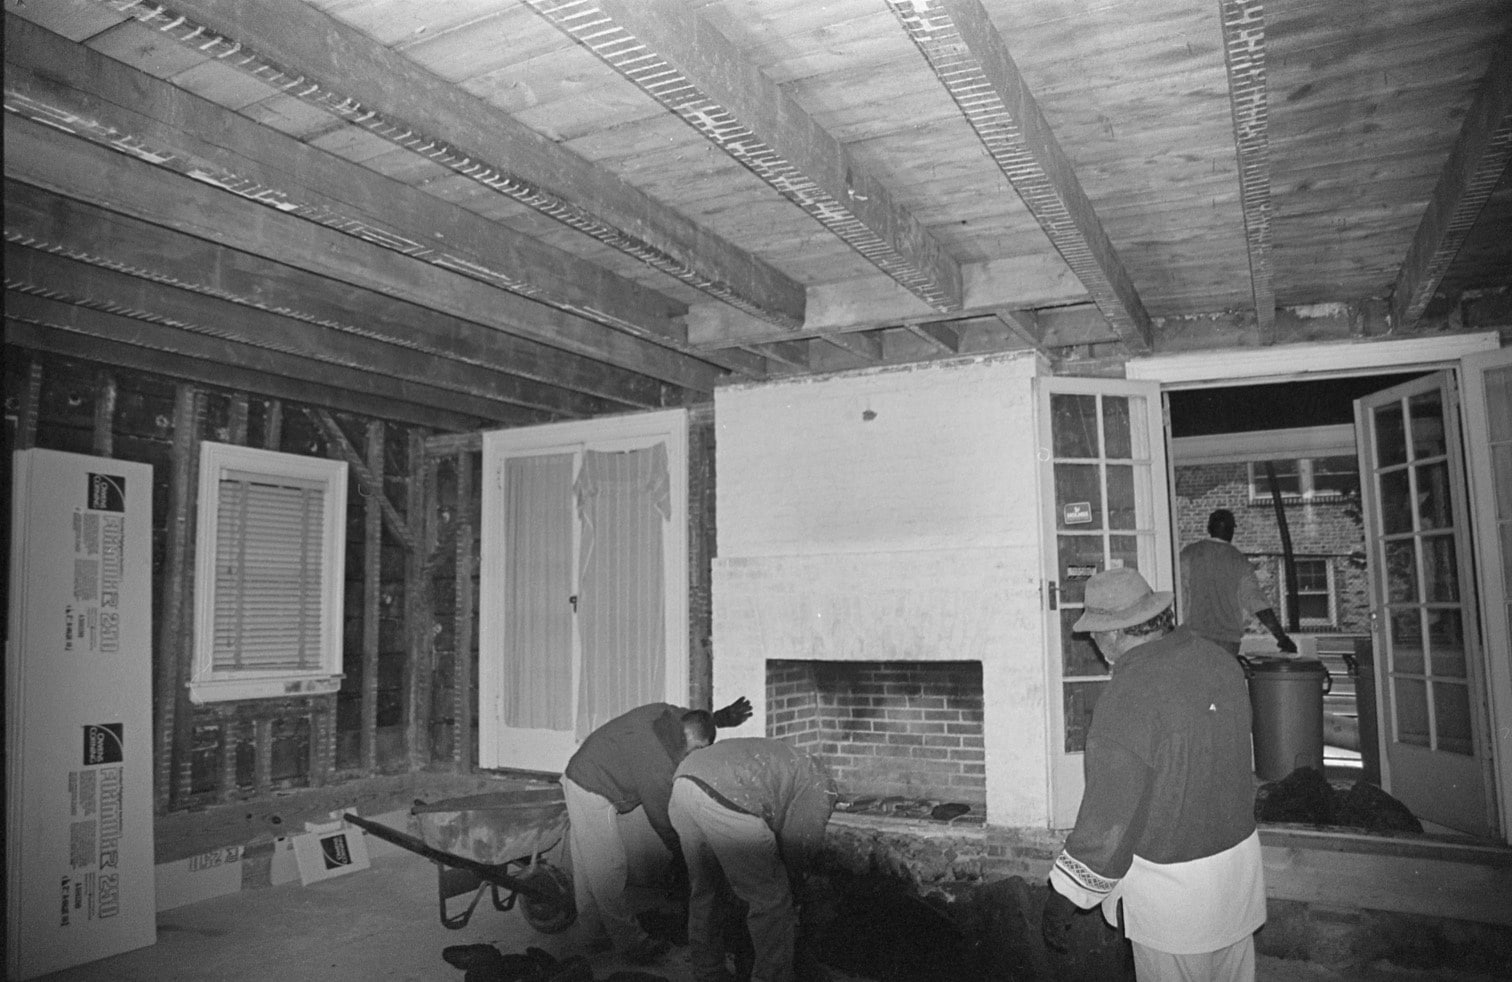 black and white photo of people working in a room with exposed room beams and no plaster on walls